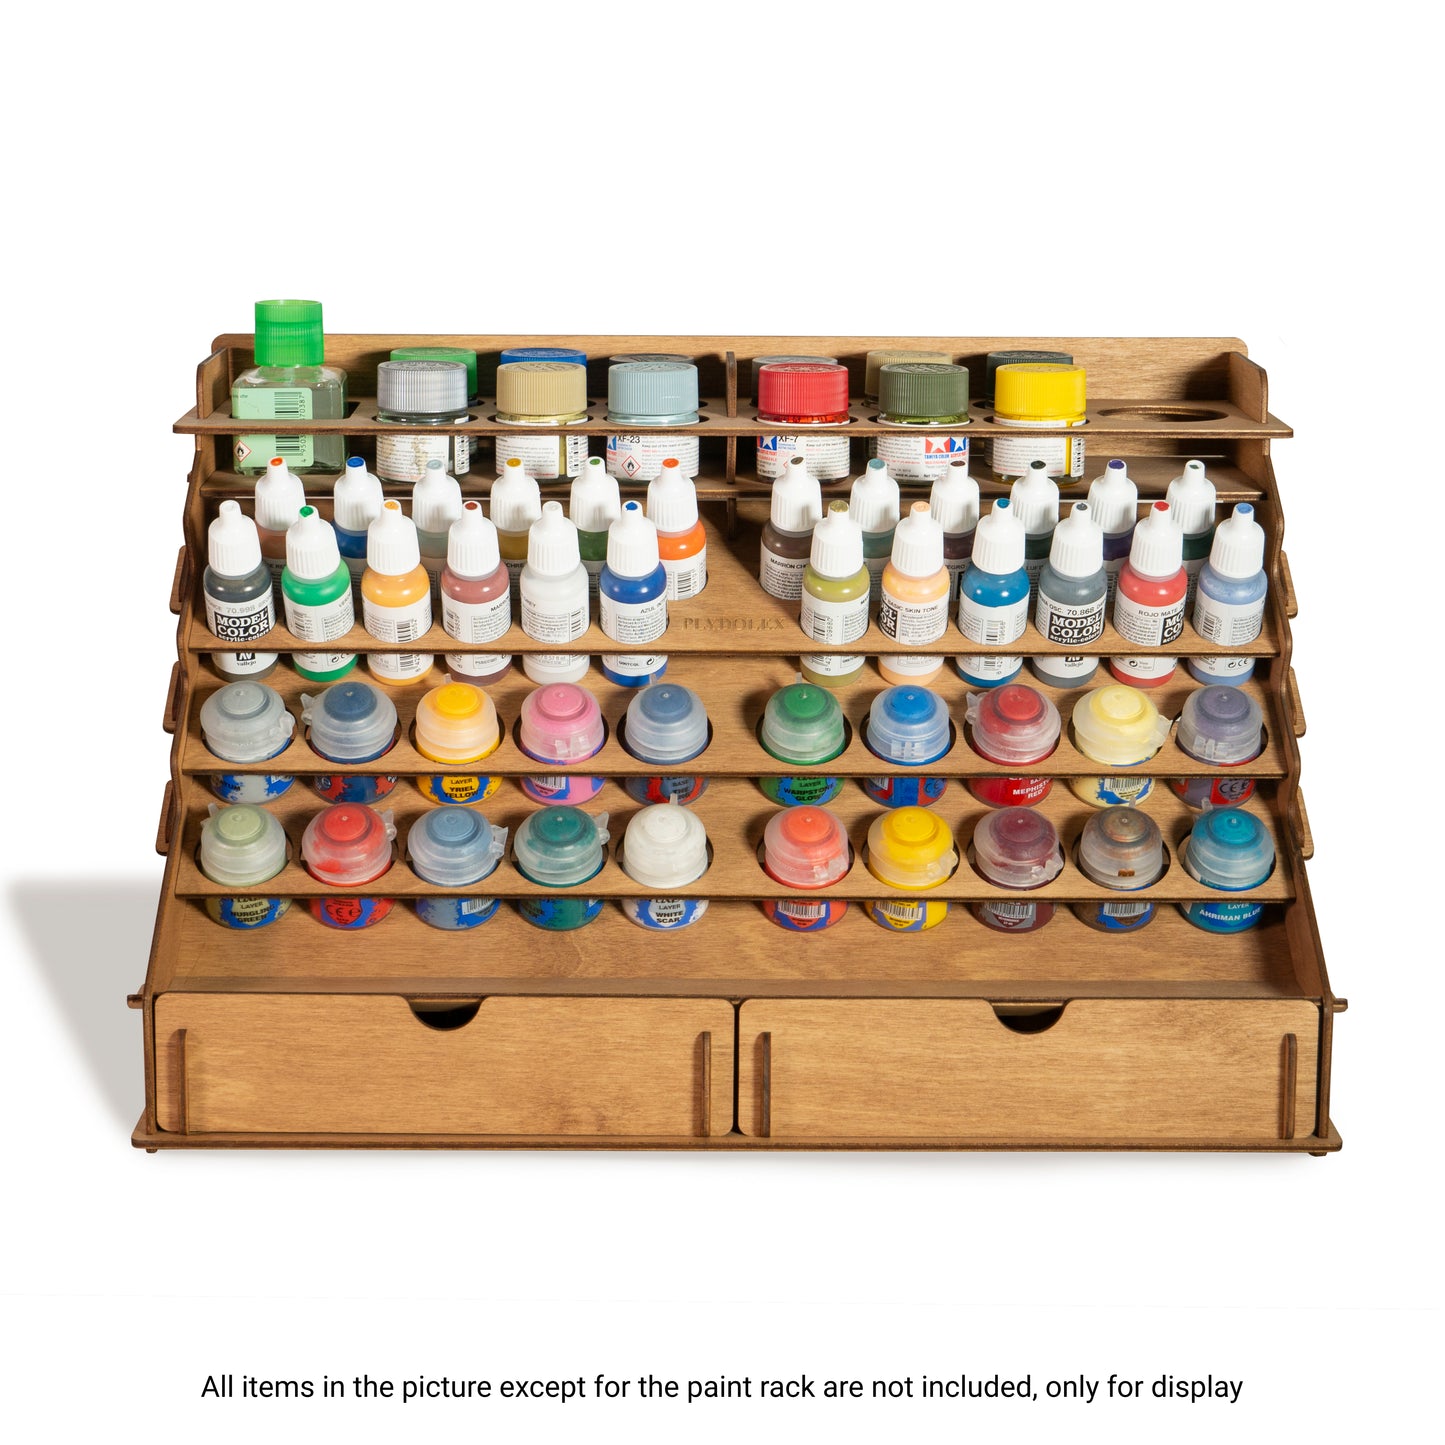 PLYDOLEX Wooden Craft Paint Storage Rack with 58 Holes for Paint Bottles - Hand Craft Paint Holder Rack with 4 Miniature Stands and Removable Upper Shelf - Paint Organizer for Miniature Paint Set